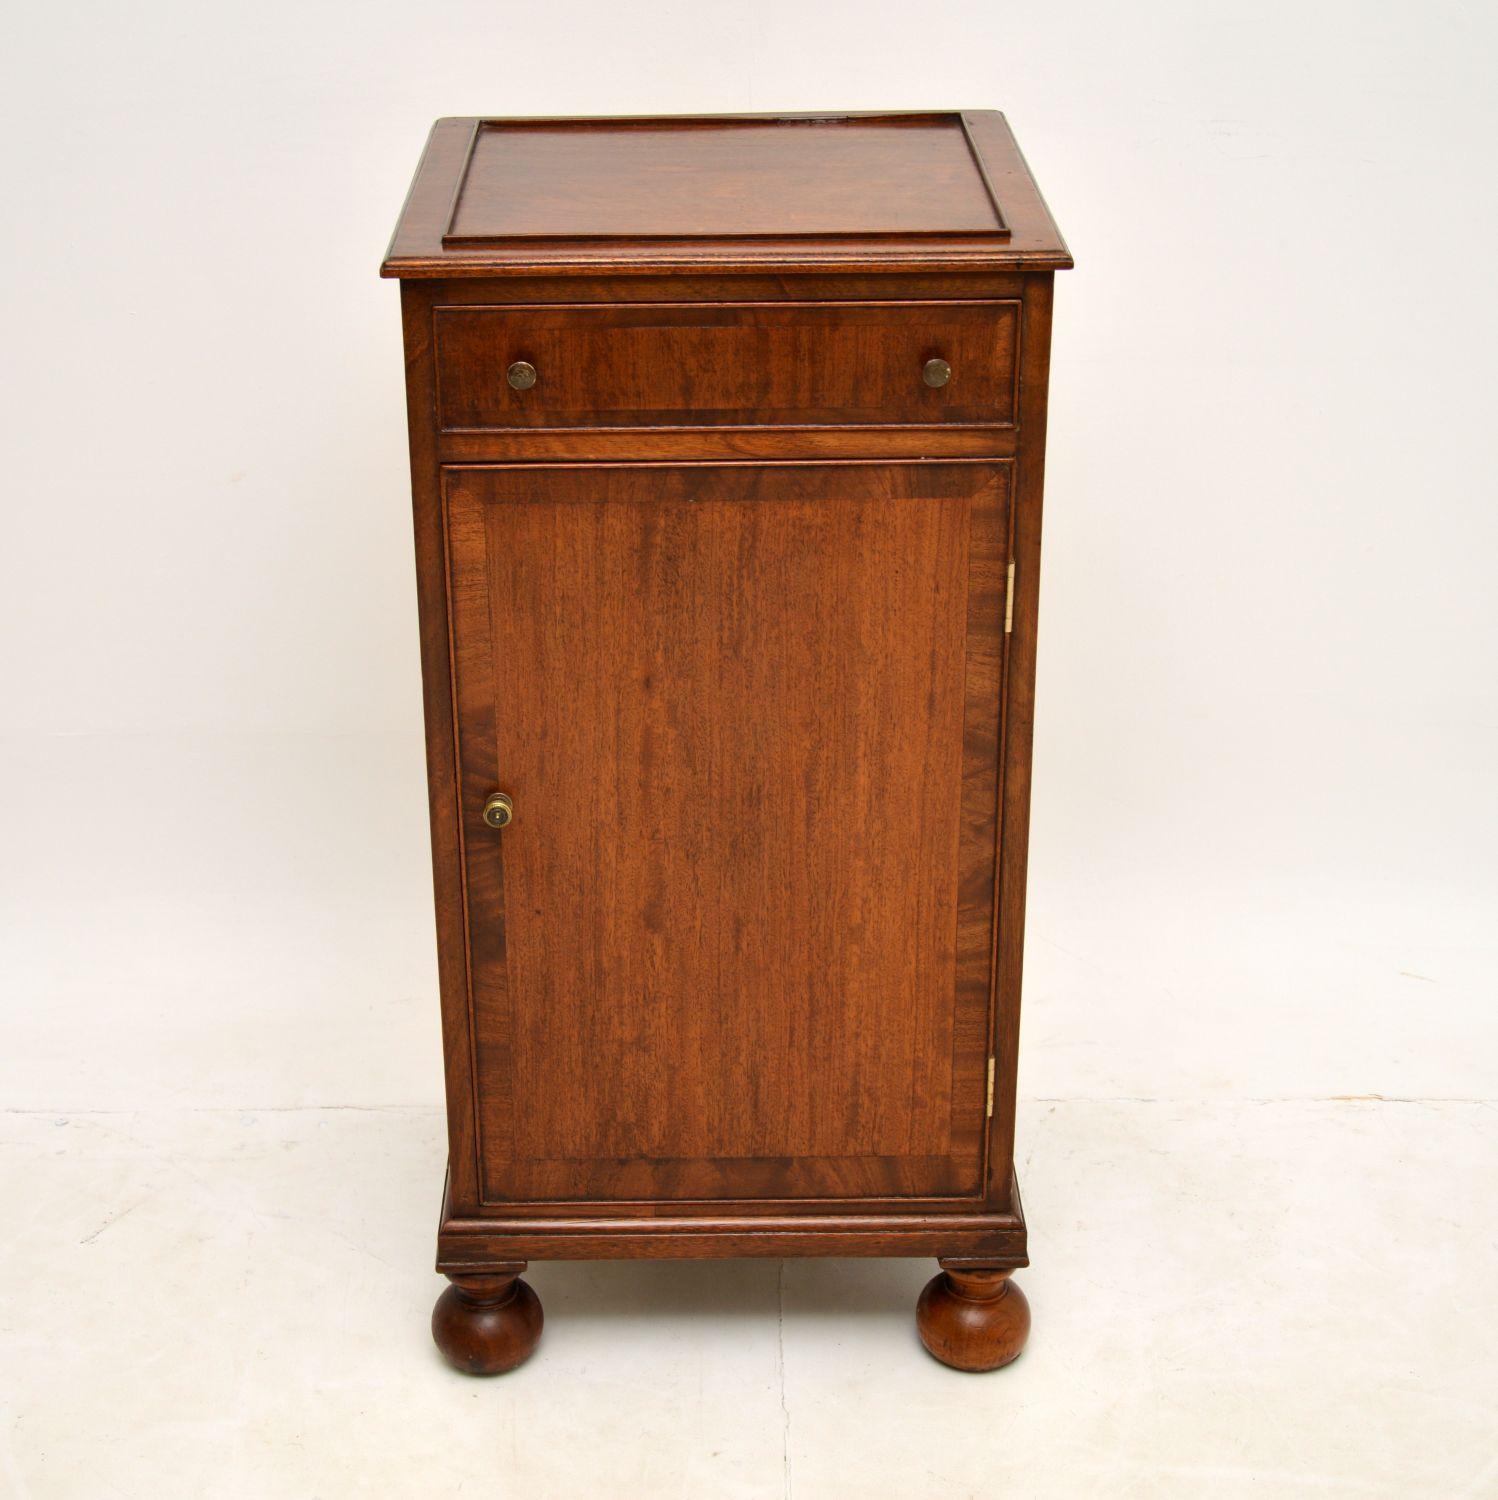 A wonderful antique Victorian cabinet. This was made in England & dates from around the 1850’s period.

The quality is fantastic, this is really well made from solid wood with some wooden cross banding. The original brass handles are also of fine